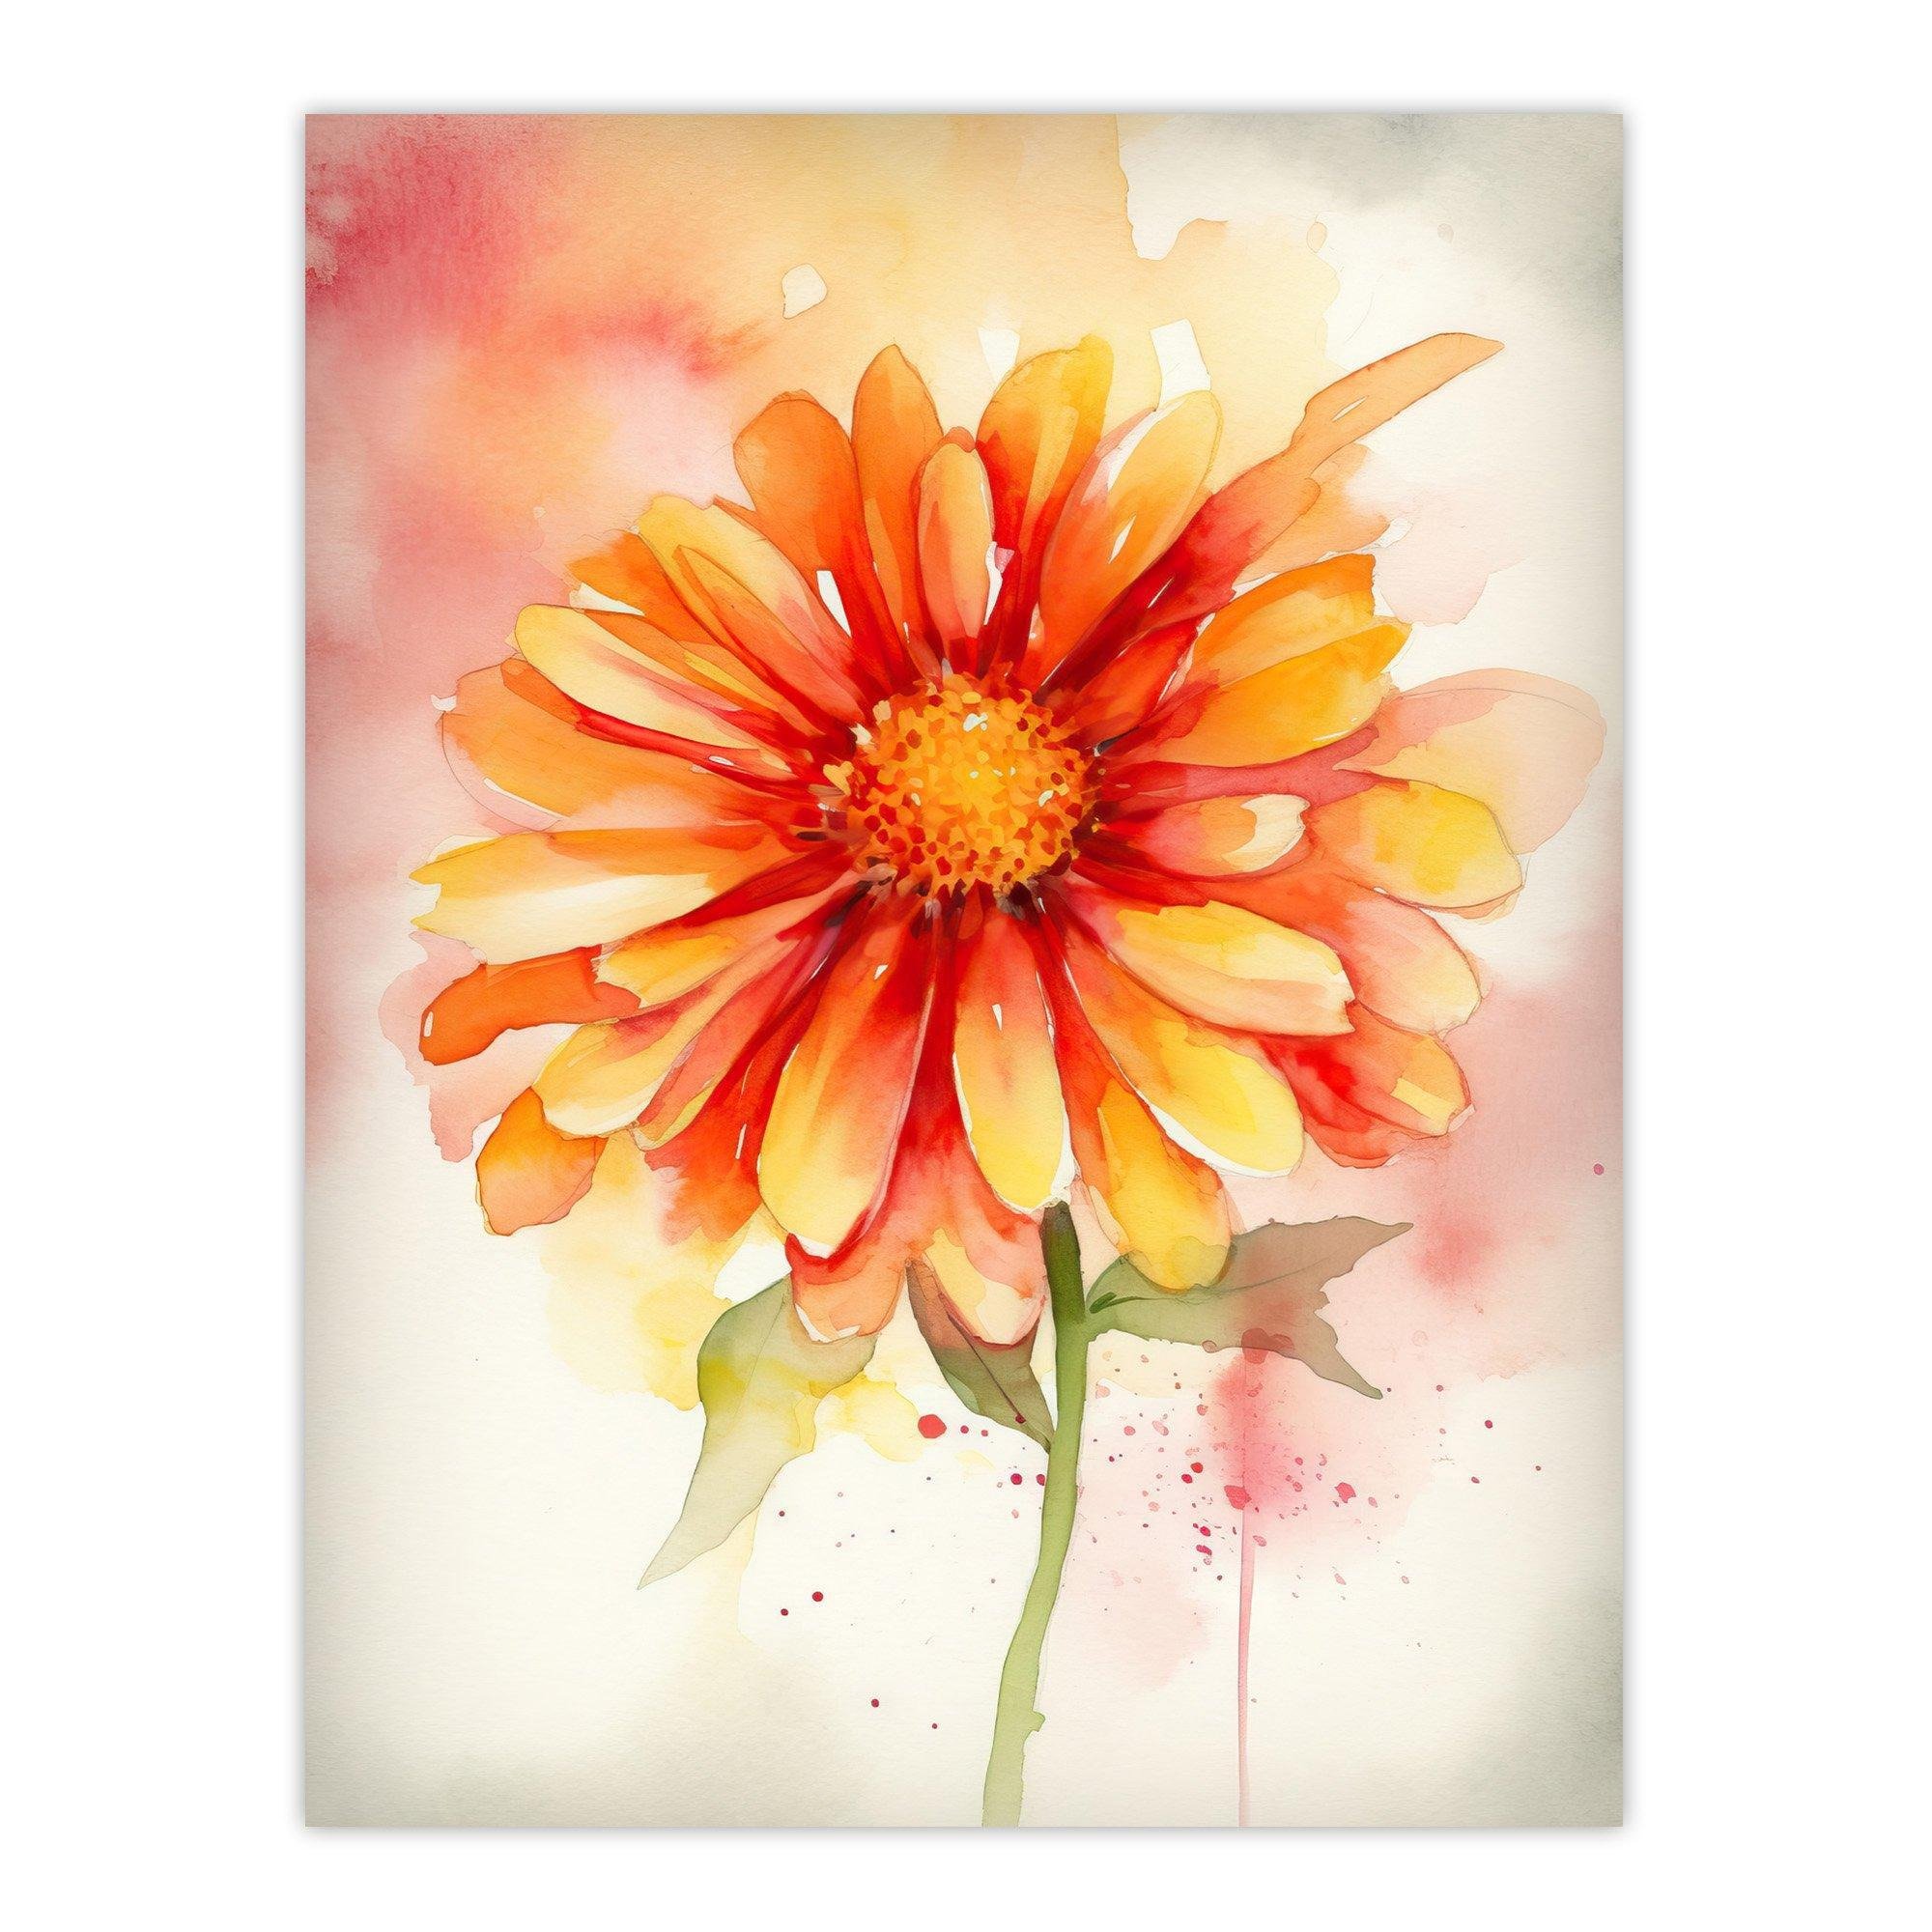 A Single Gerbera Daisy Soft Watercolour Painting Pink Green Orange Spring Bloom Flower Nature Colourful Bright Floral Modern Artwork Unframed Wall Art Print Poster Home Decor Premium - image 1